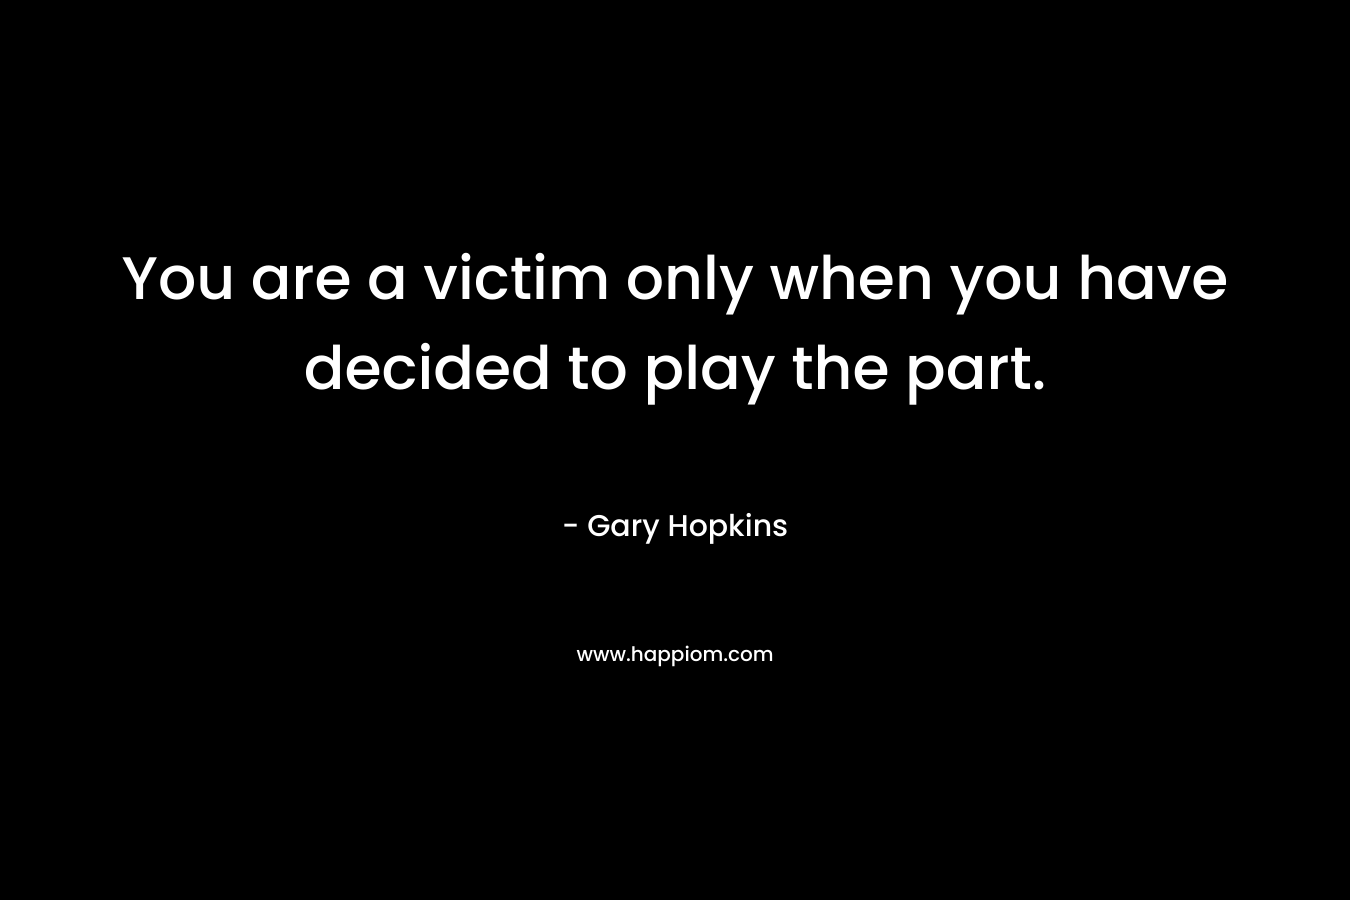 You are a victim only when you have decided to play the part.